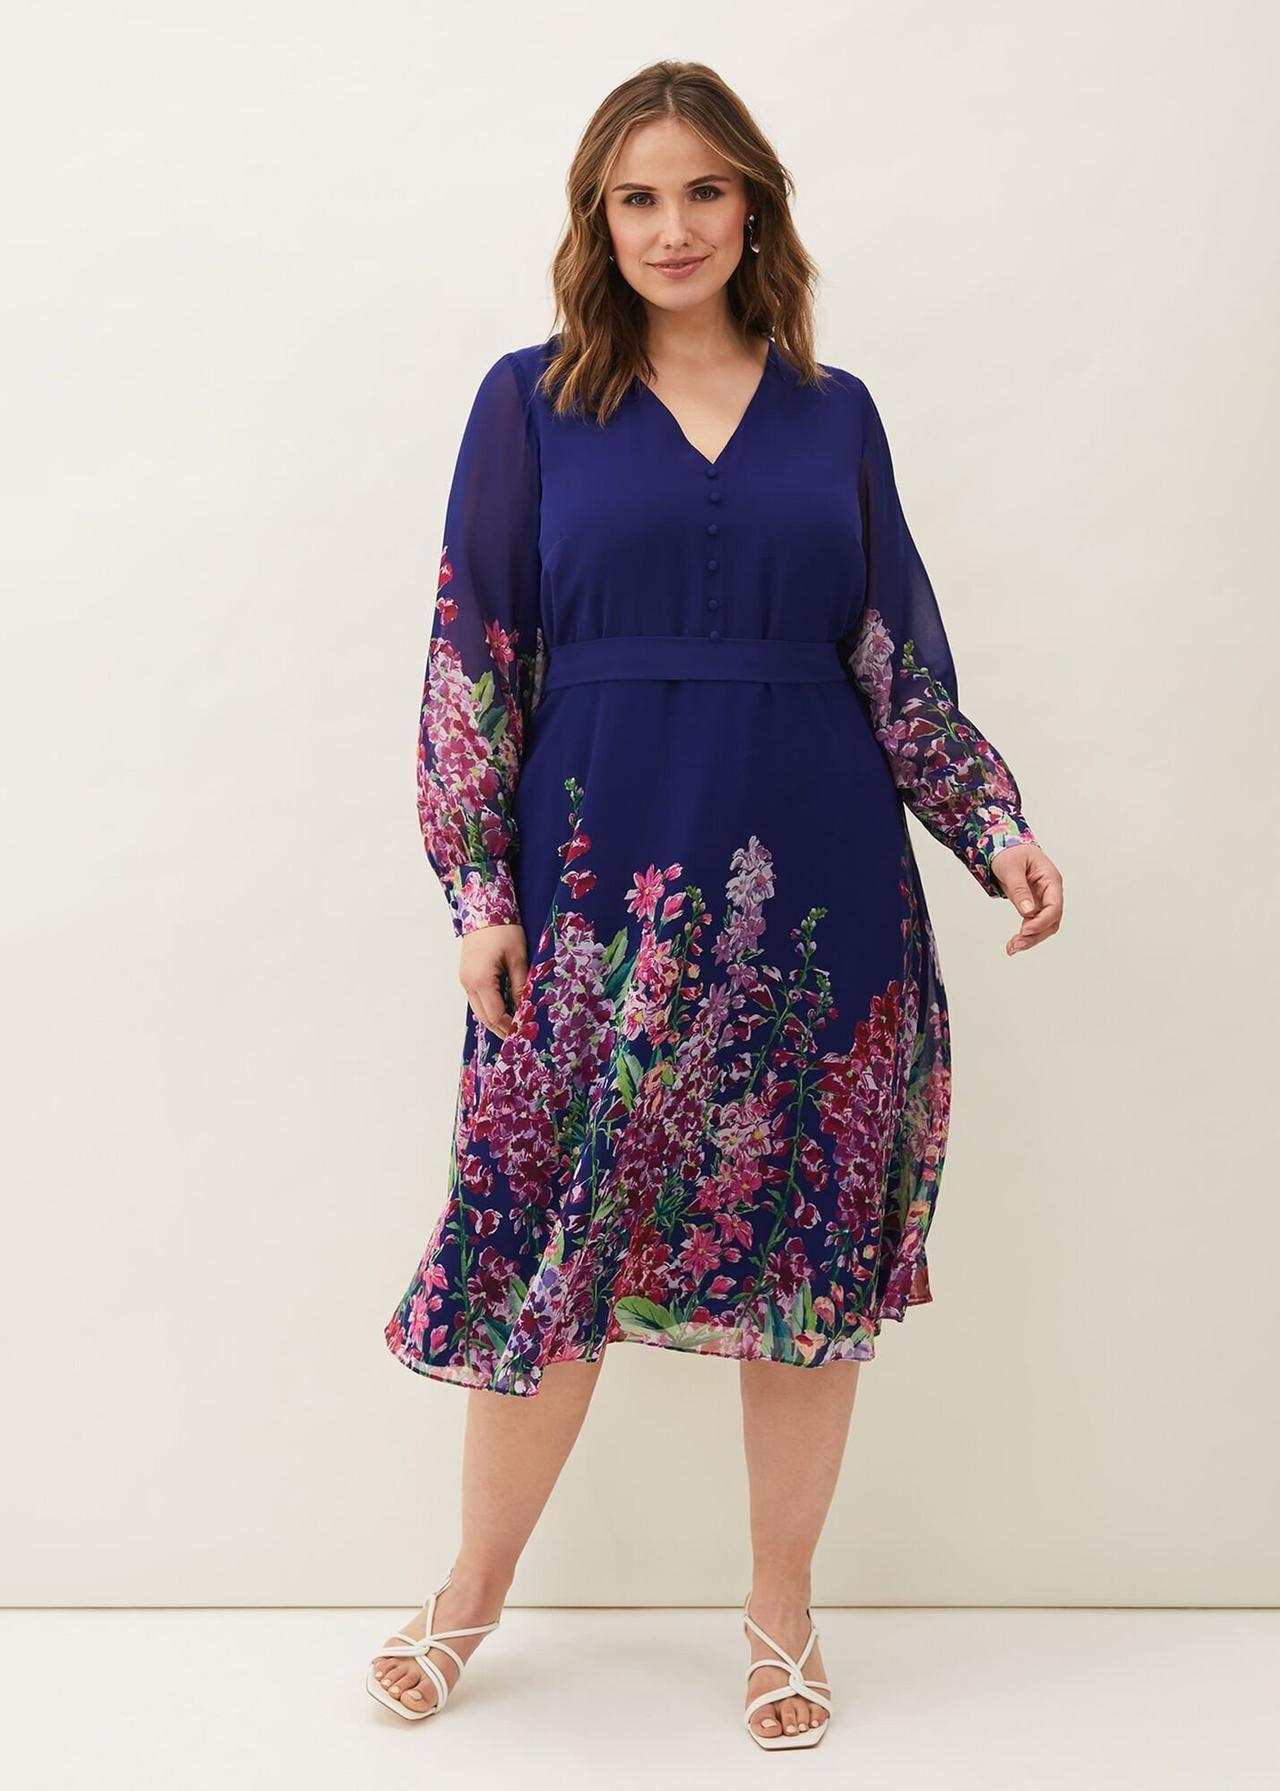 25 Plus Size Mother of the Groom Outfits & Dresses 2021 - hitched